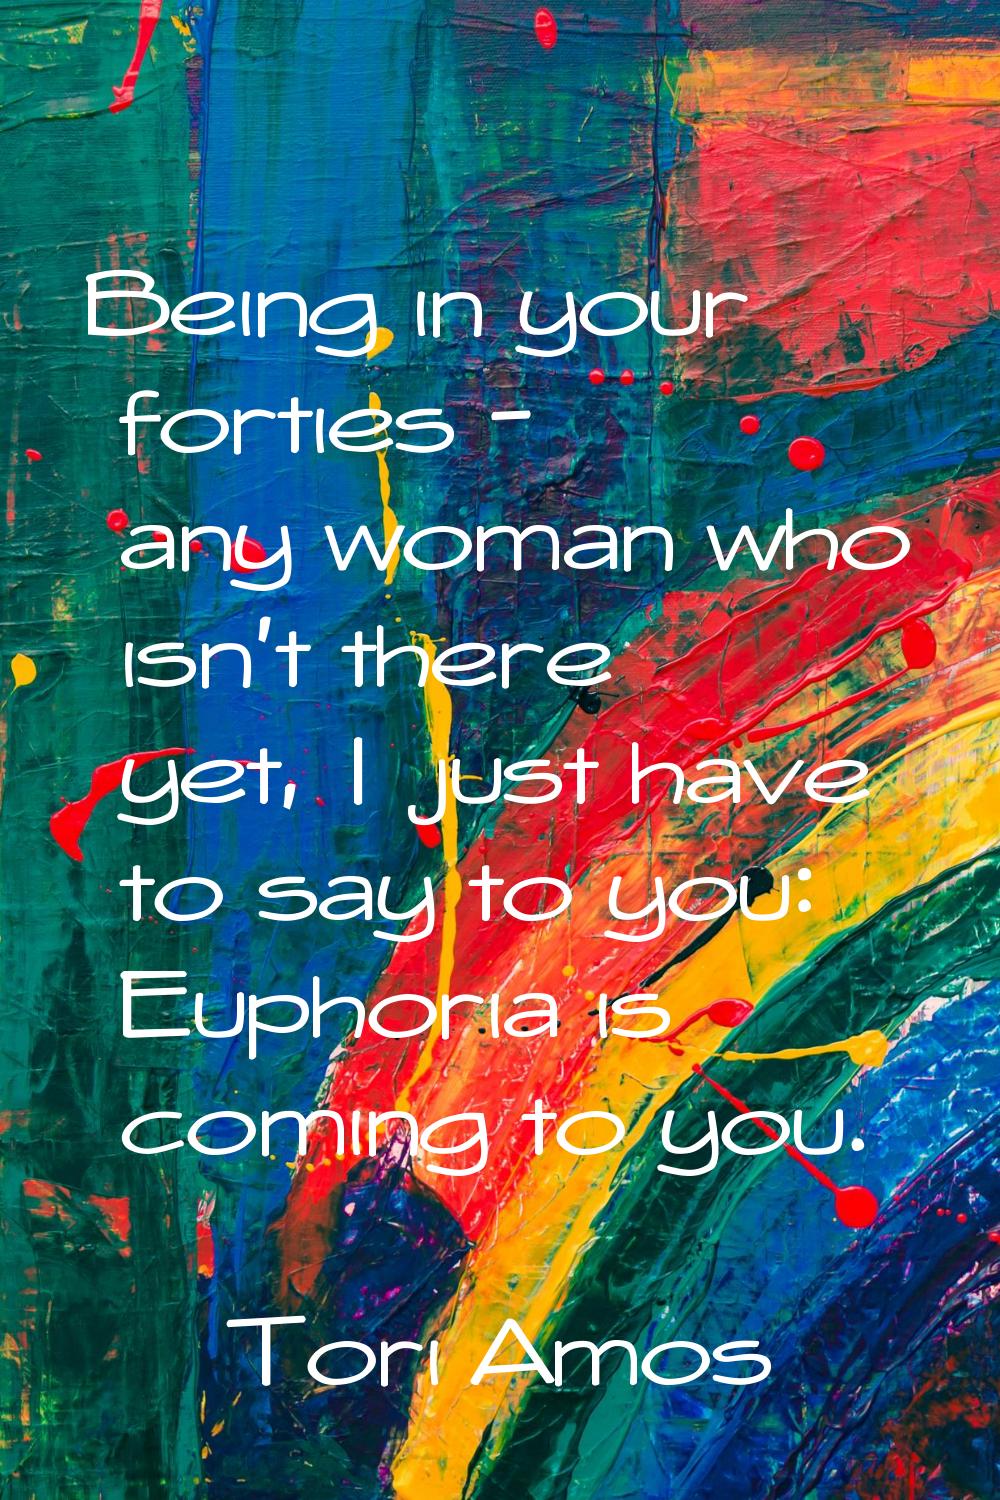 Being in your forties - any woman who isn't there yet, I just have to say to you: Euphoria is comin